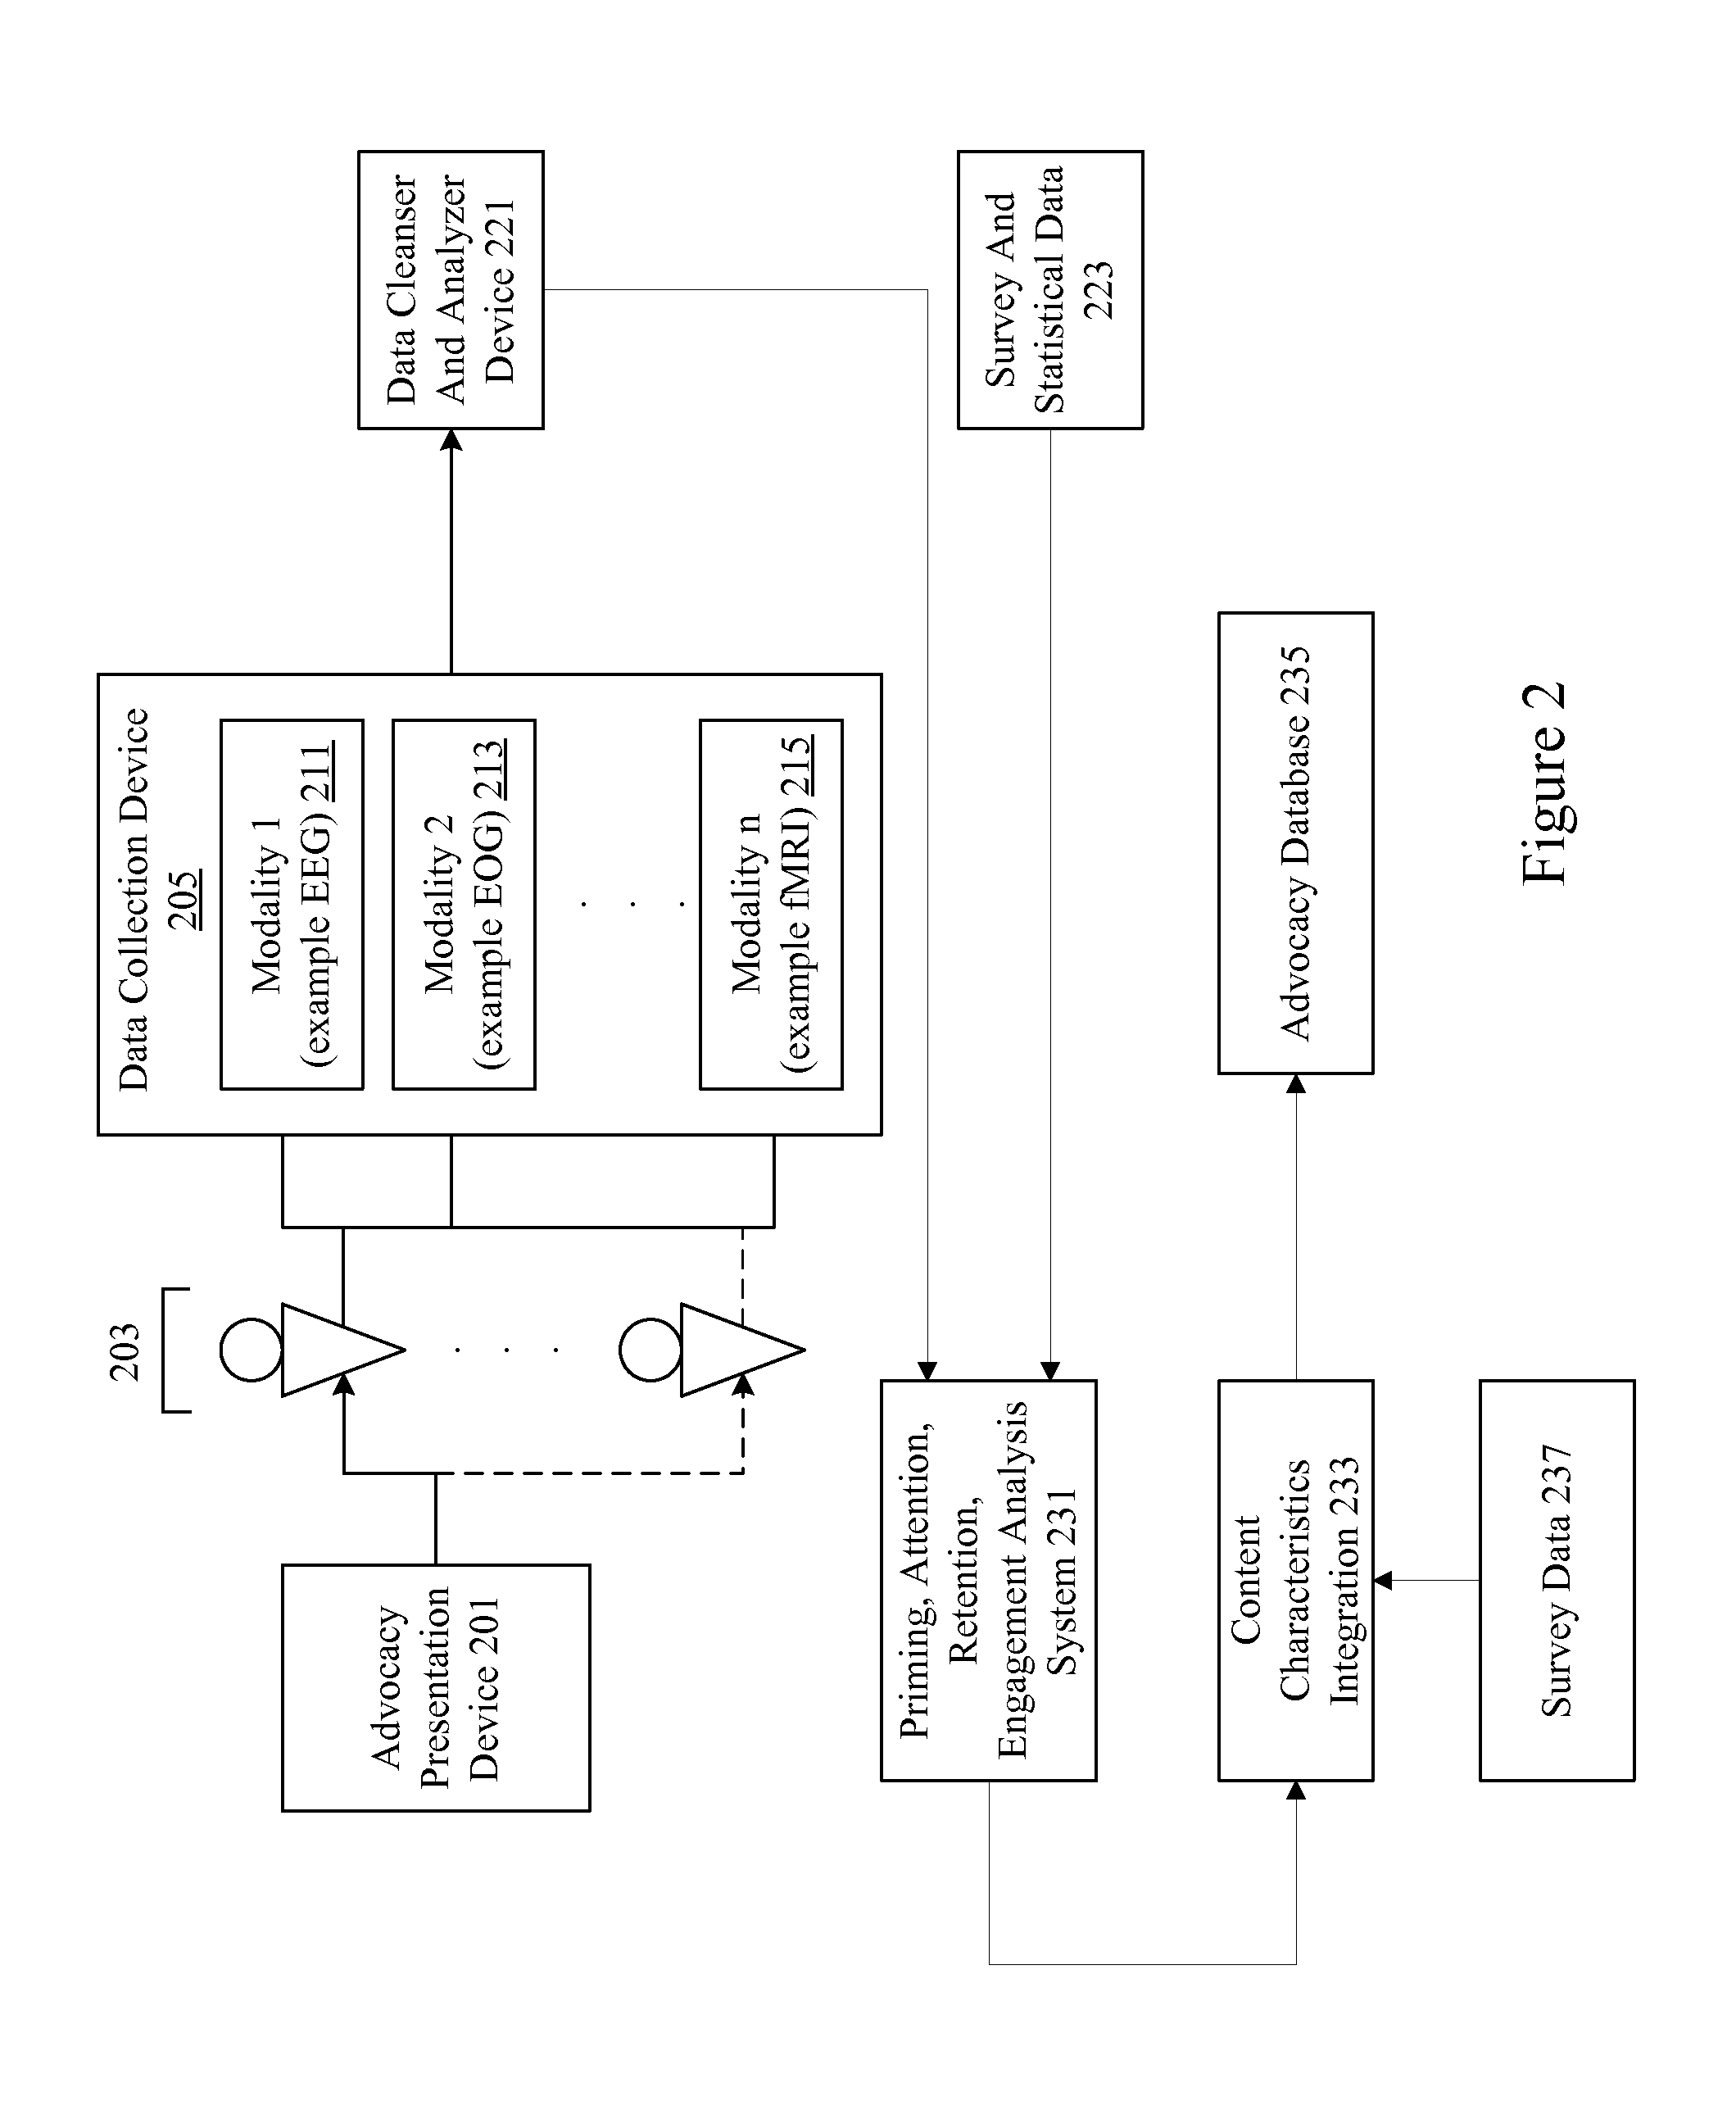 Methods and apparatus for providing advocacy as advertisement